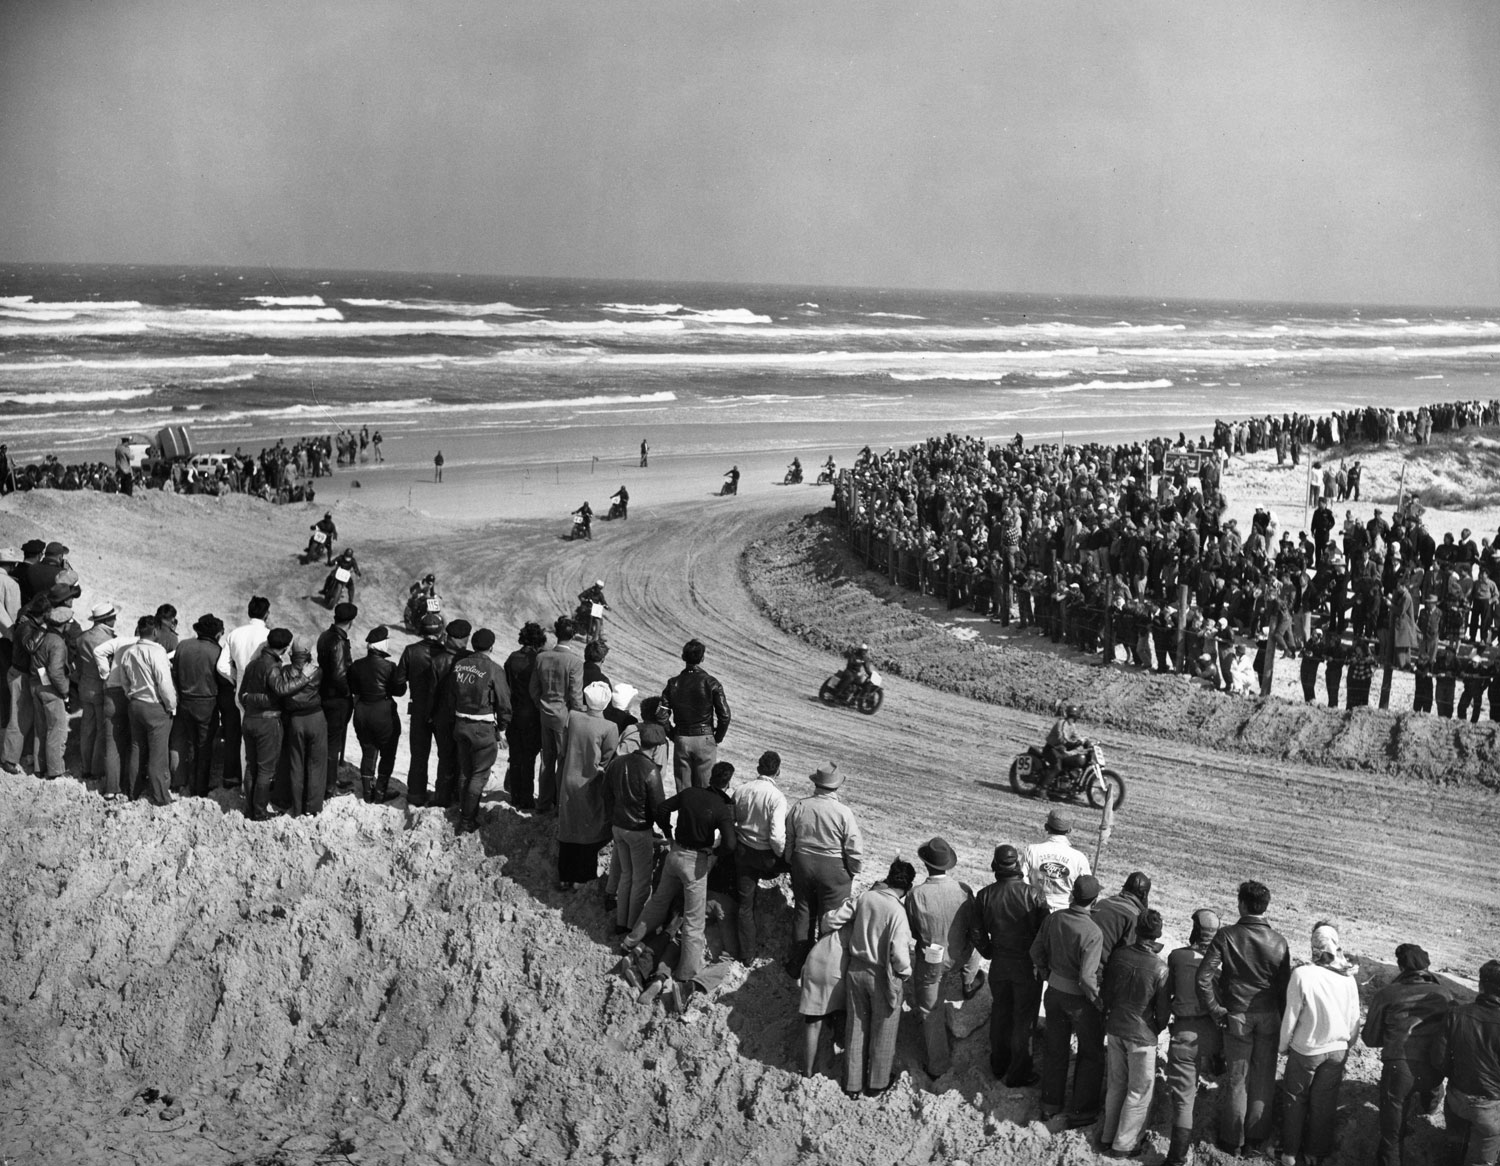 Spectators stand on the beach to watch the Daytona Beach Motorcycle Races in March 1948.